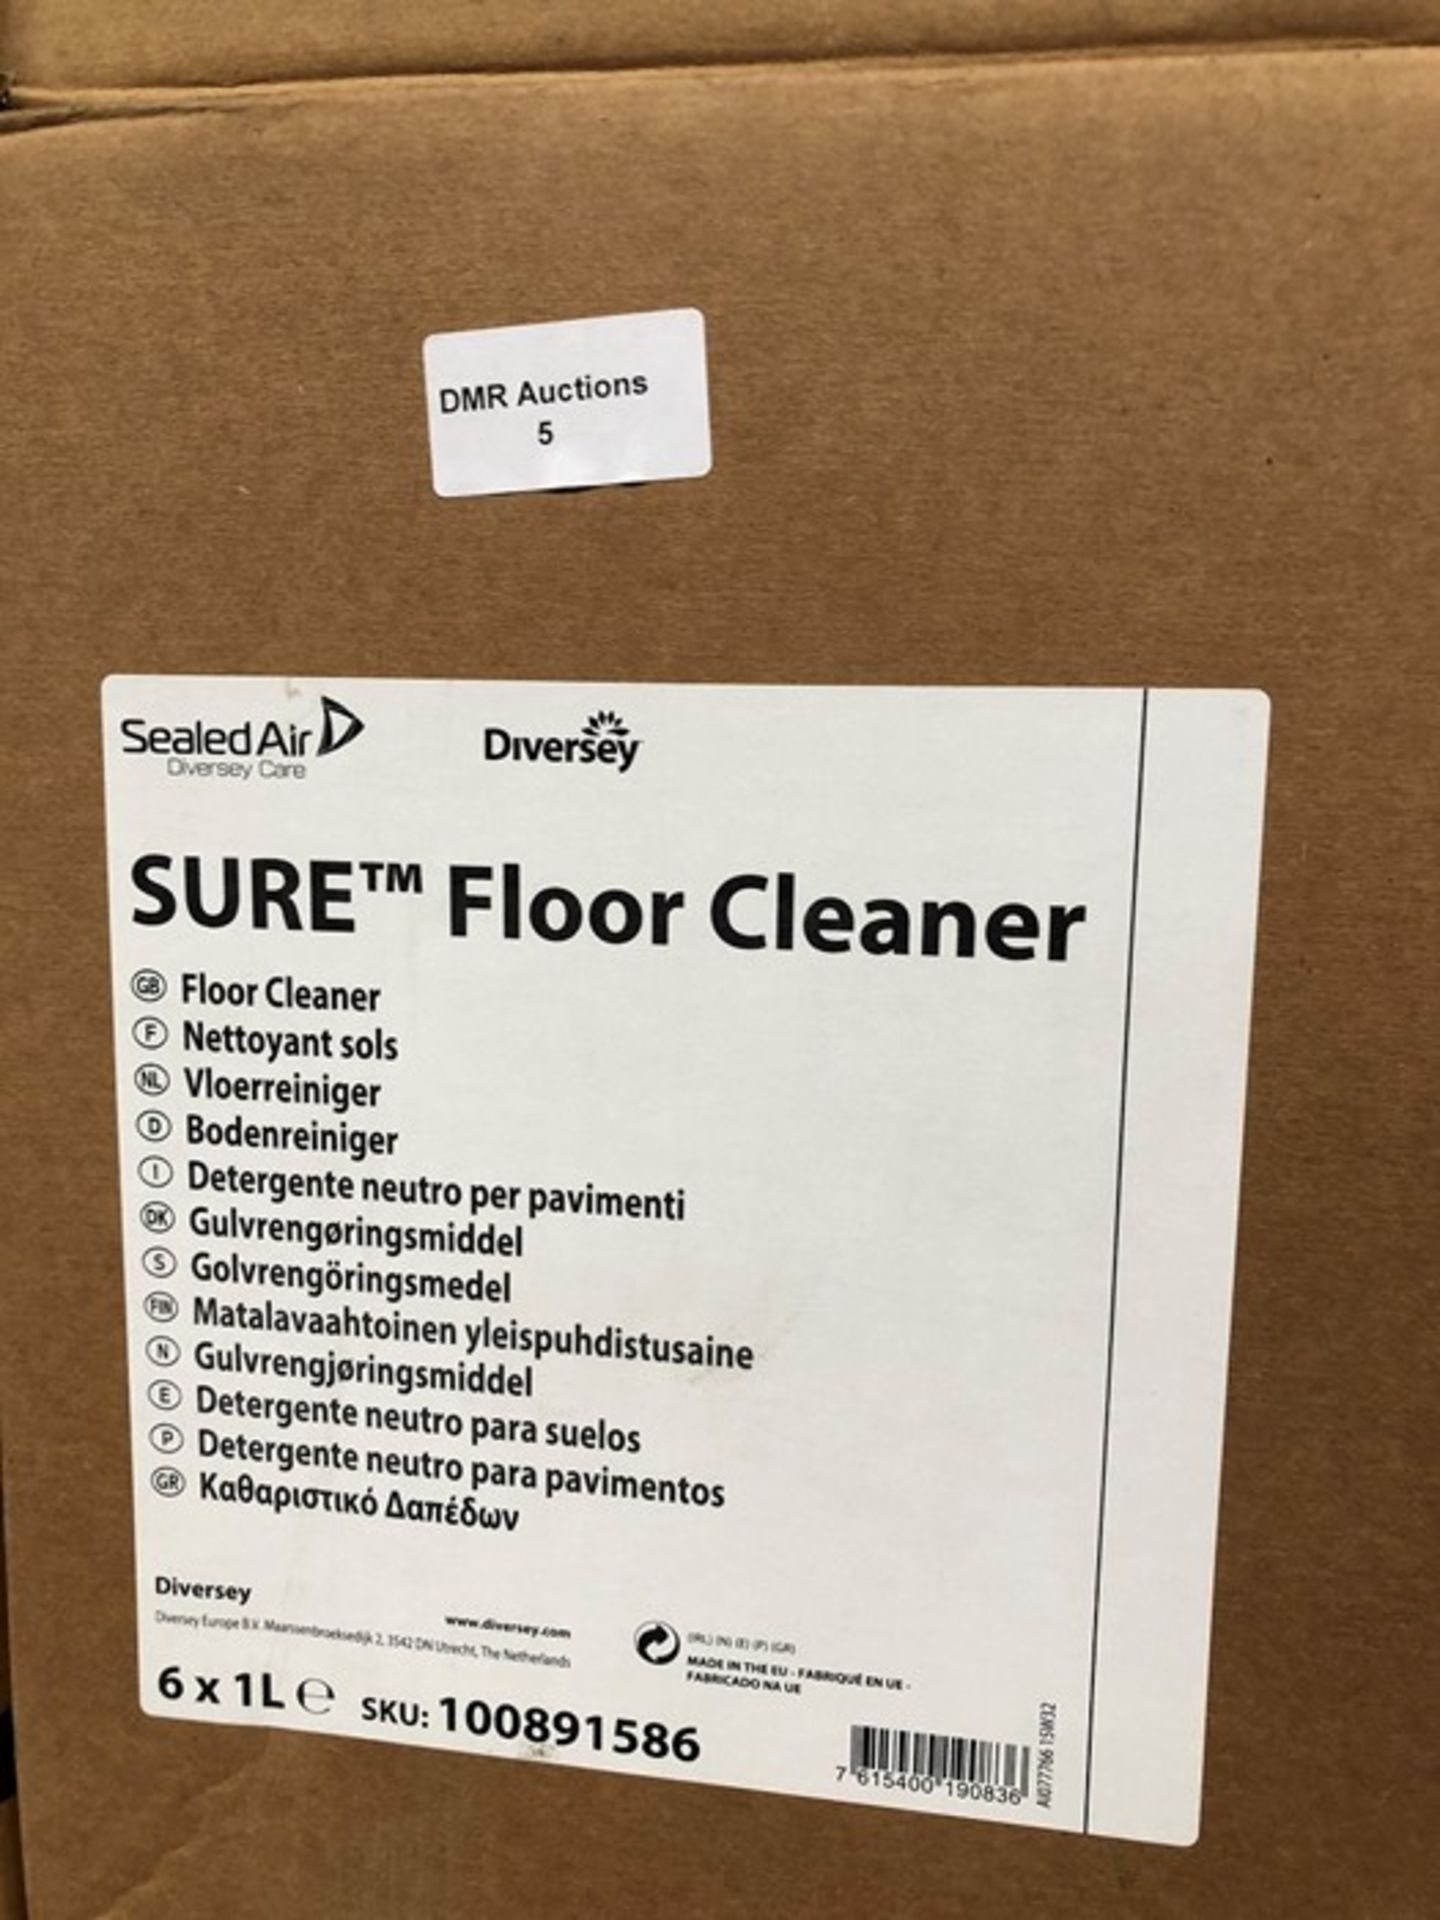 1 LOT TO CONTAIN 8 BOXES OF SURE FLOOR CLEANER - EACH BOX CONTAINS 6 X 1L BOTTLES